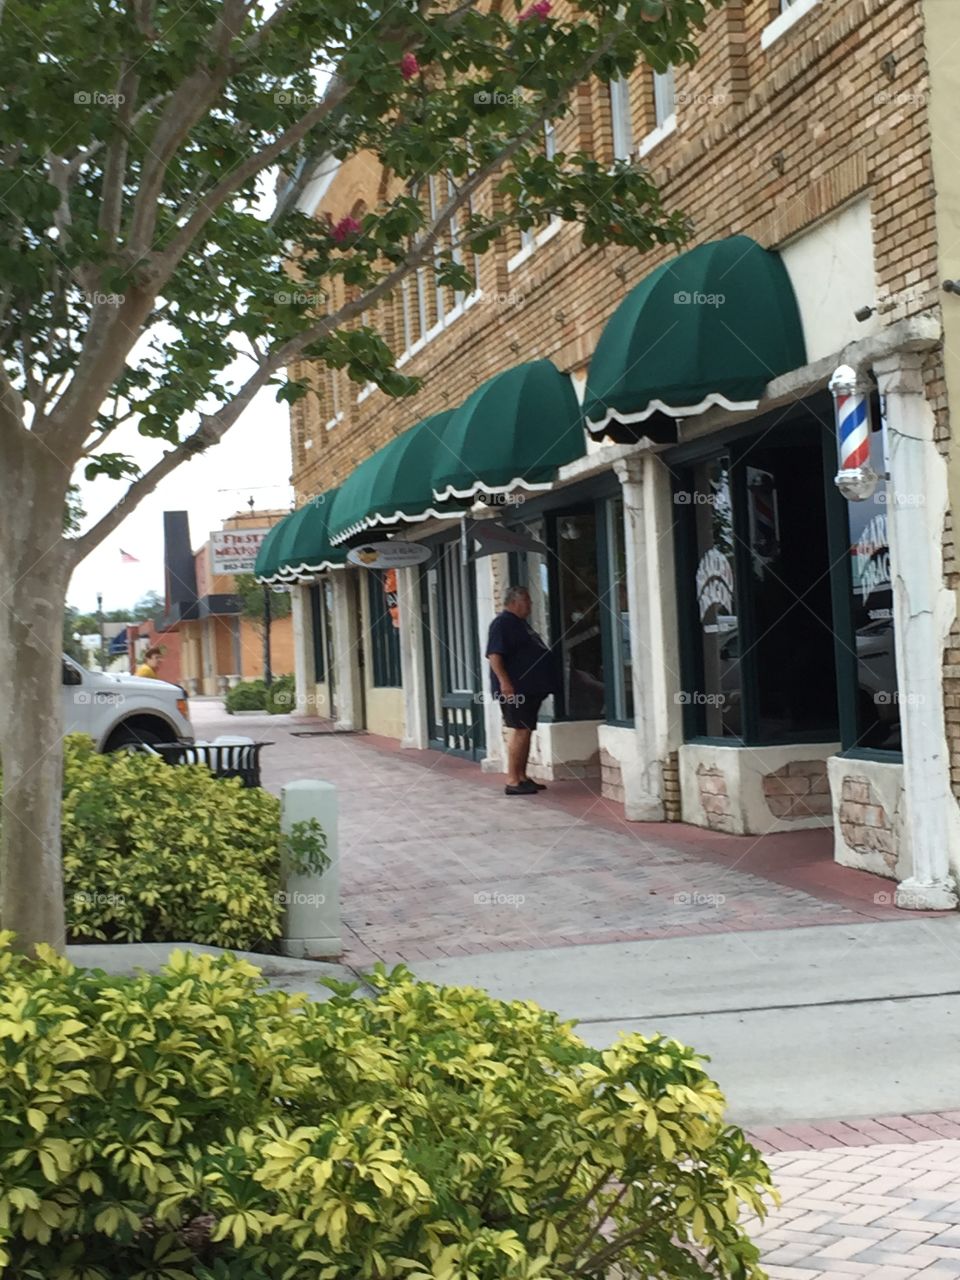 Sunday in Haines City. The green awnings of Haines City, Florida. August on Sunday afternoon in 2015